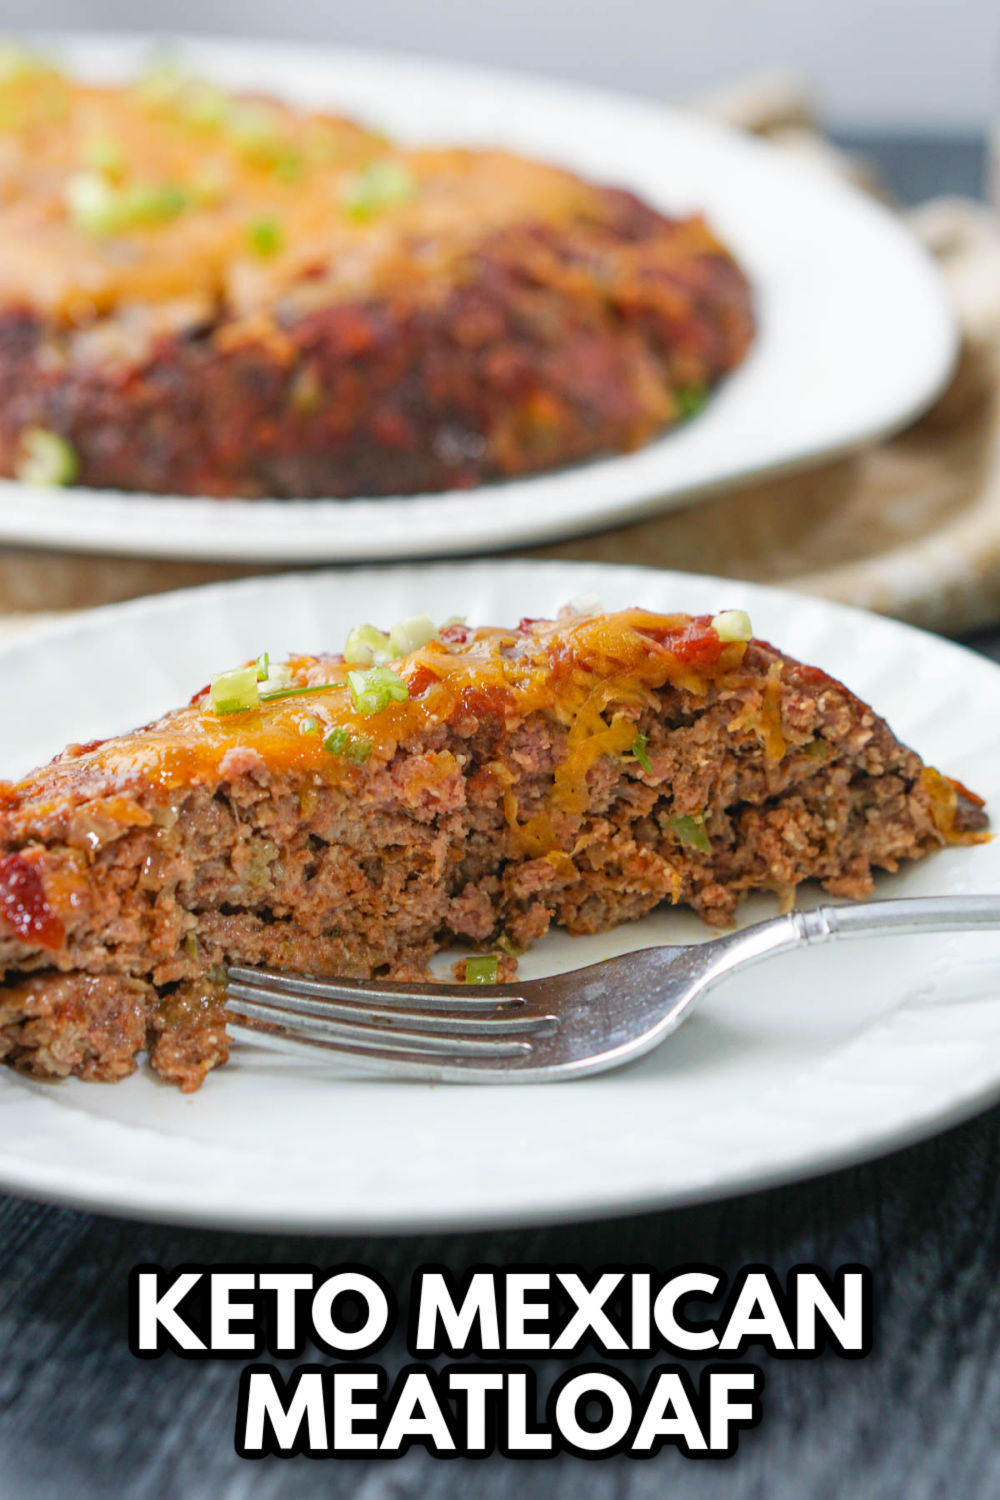 a white platter and dish with Keto Mexican meatloaf with text